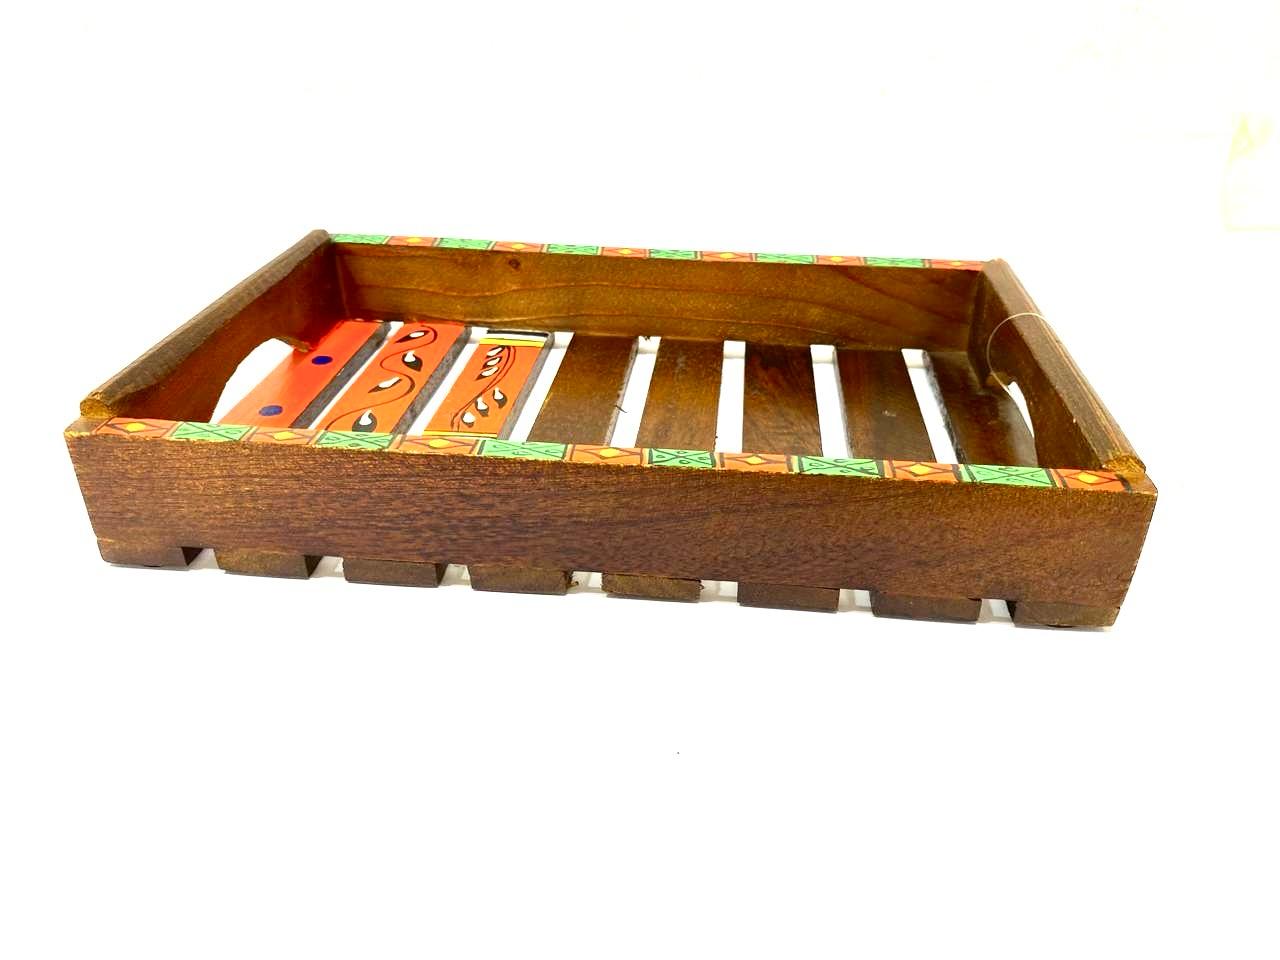 Stylish Hand Painted With Acrylic Colors Wooden Tray Utility Storage By Tamrapatra